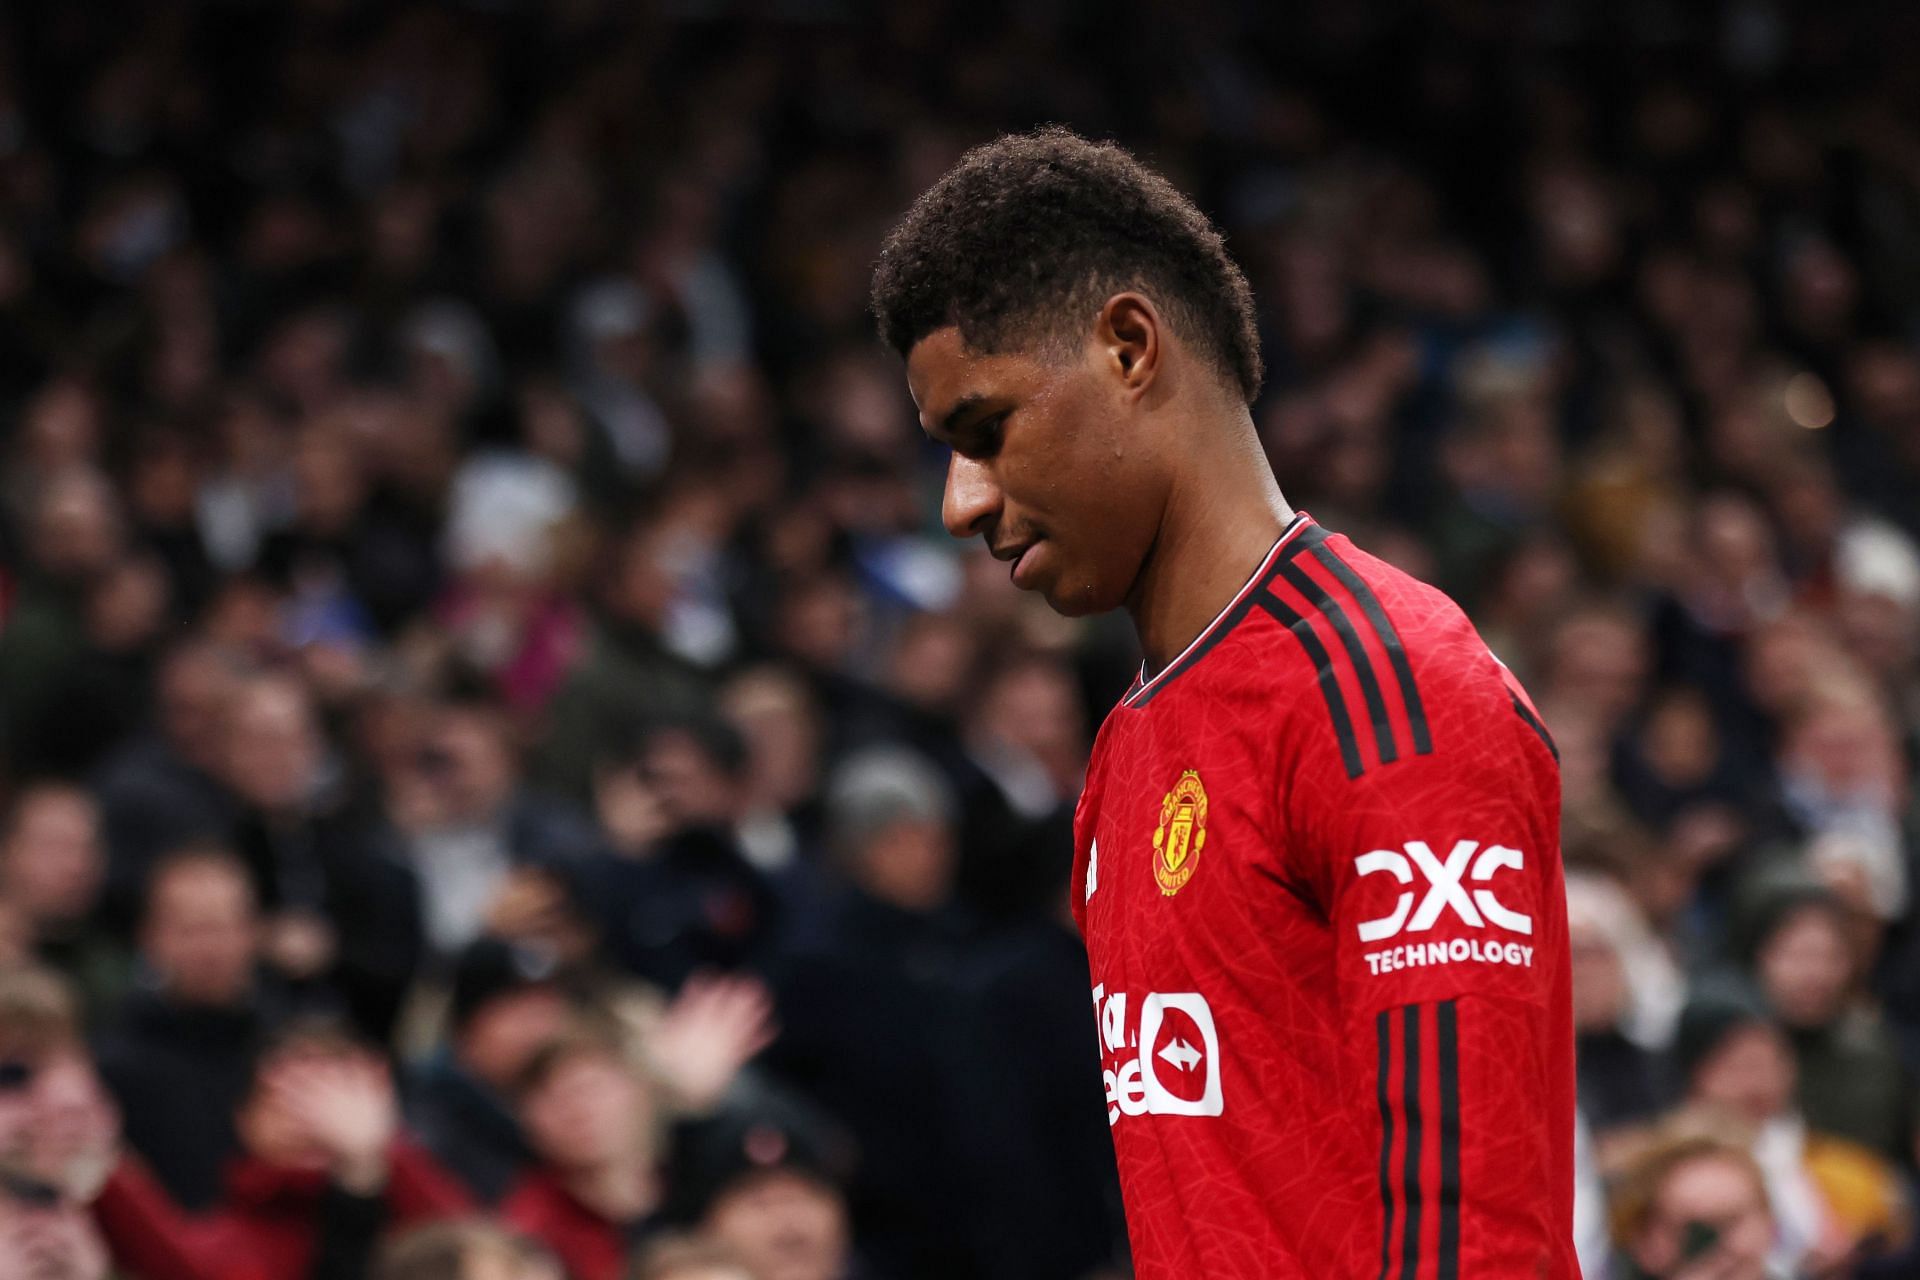 Marcus Rashford was handed just the second red card of his career.